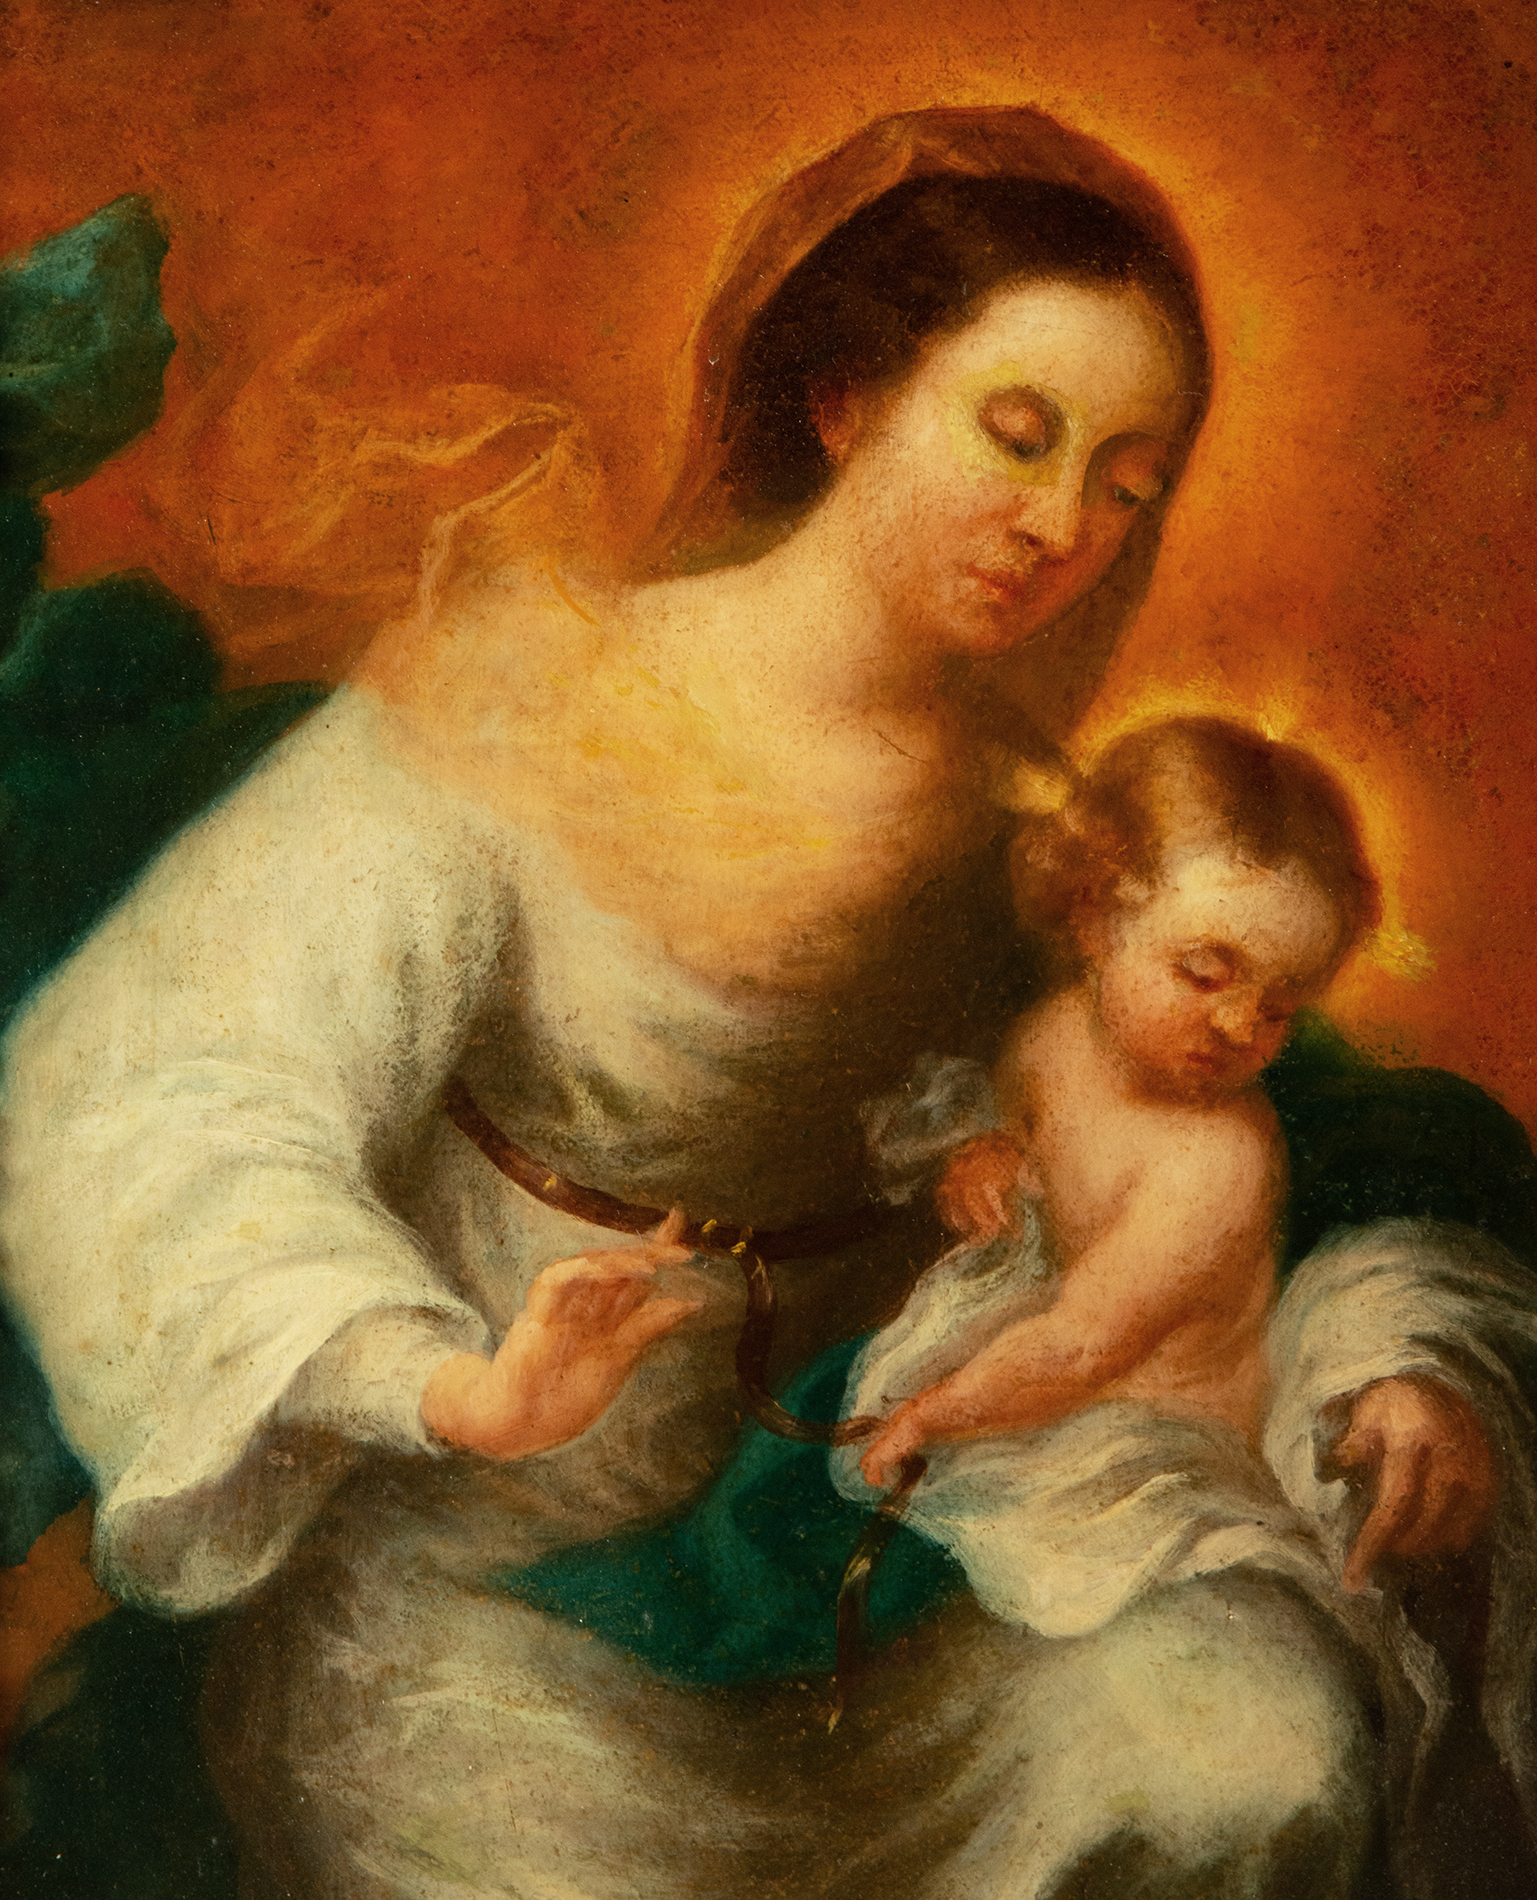 Virgin with Child in Arms, following models by Bartolomé Esteban Murillo, 19th century - Image 2 of 5